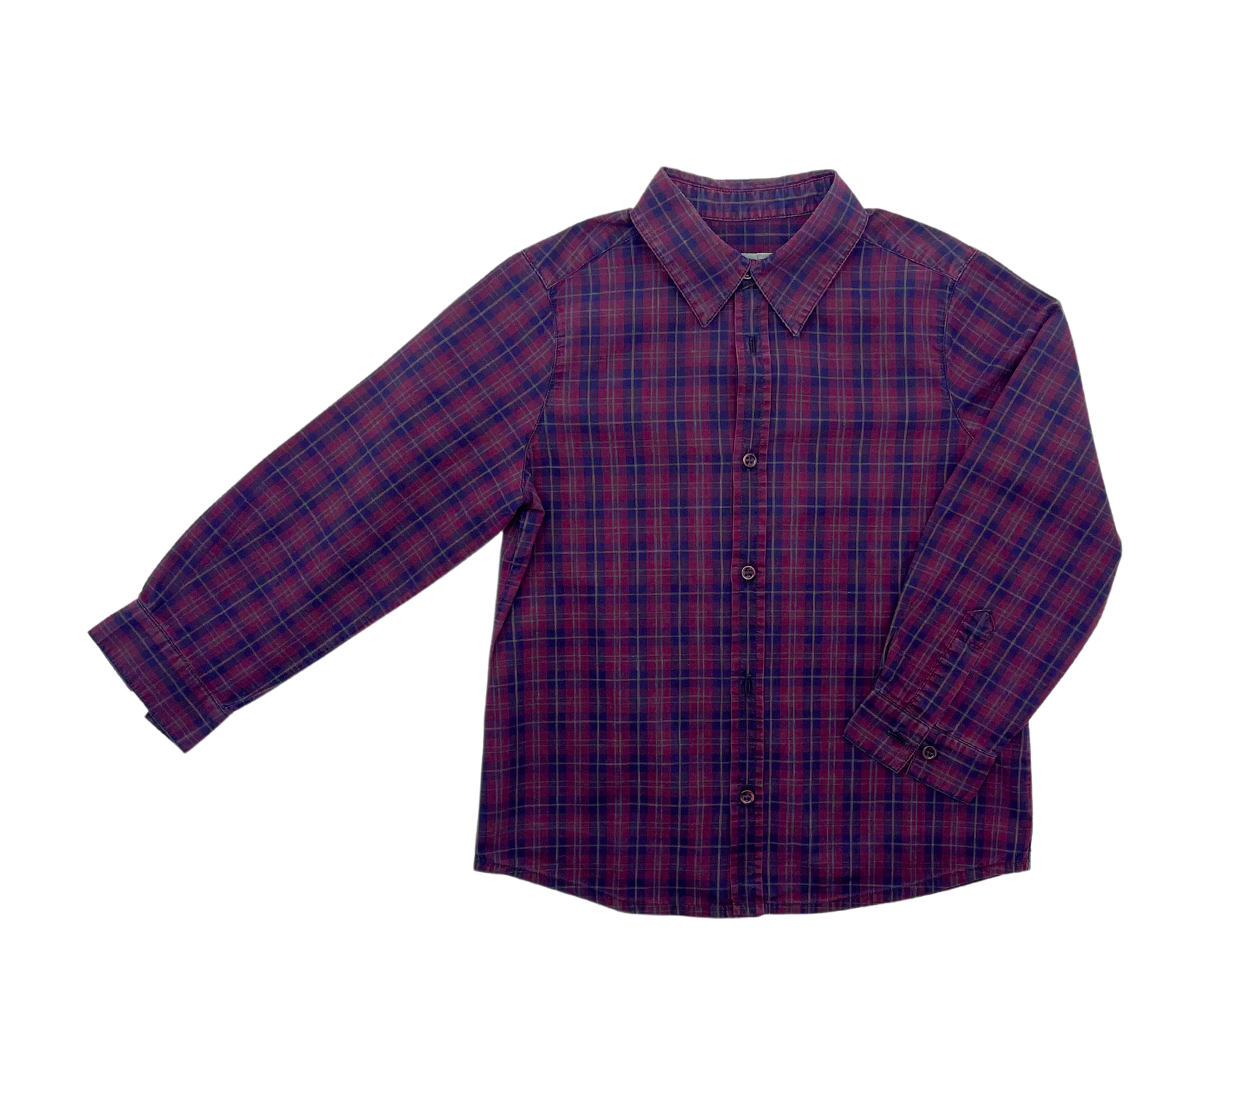 BONPOINT - Checked shirt - 4 years old